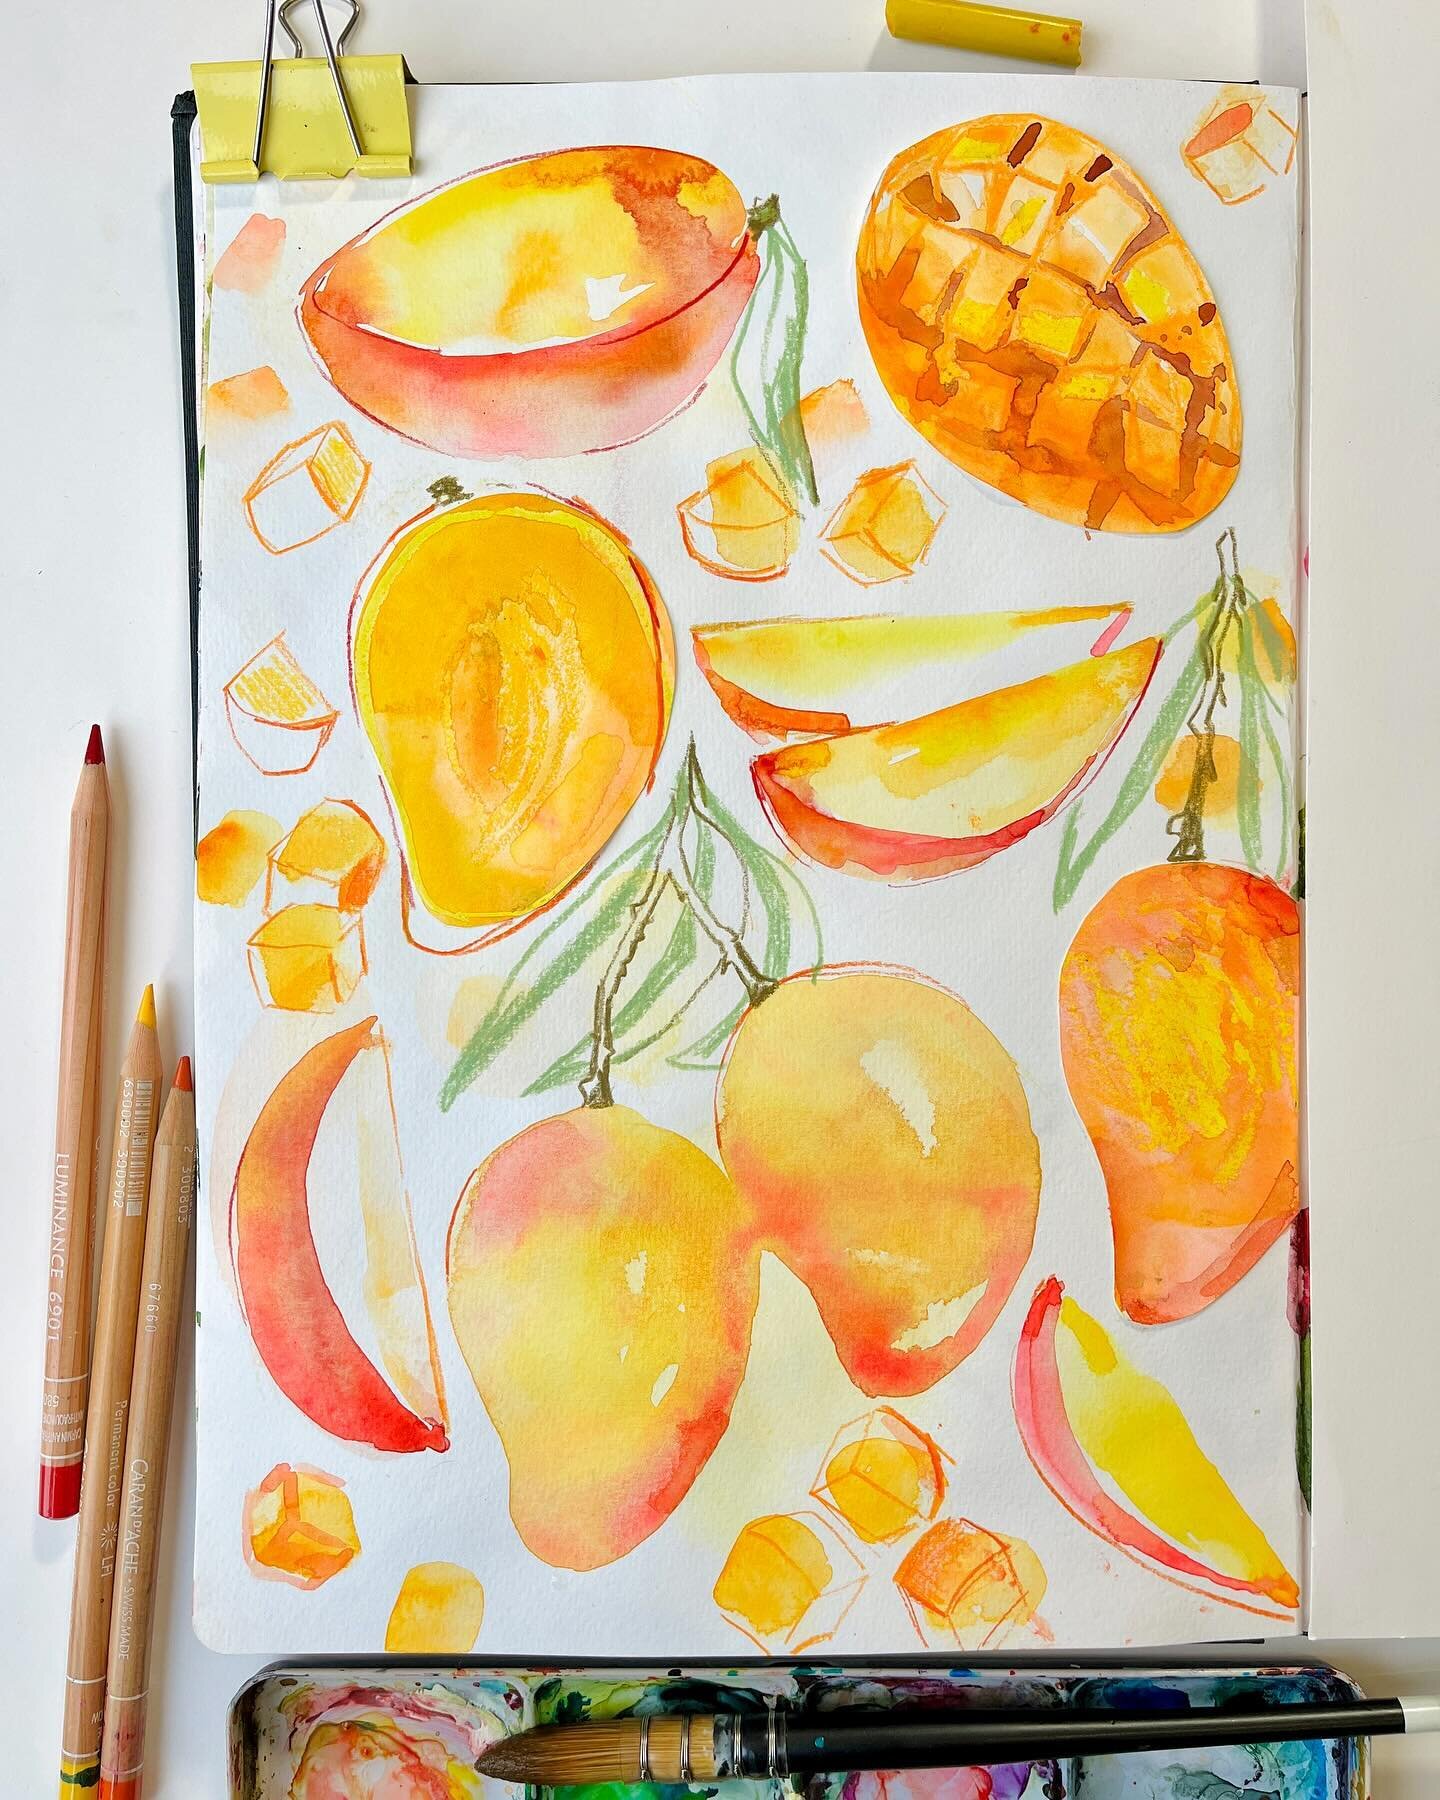 Top Tips for Masking Fluid Magic with Watercolors — Ohn Mar Win